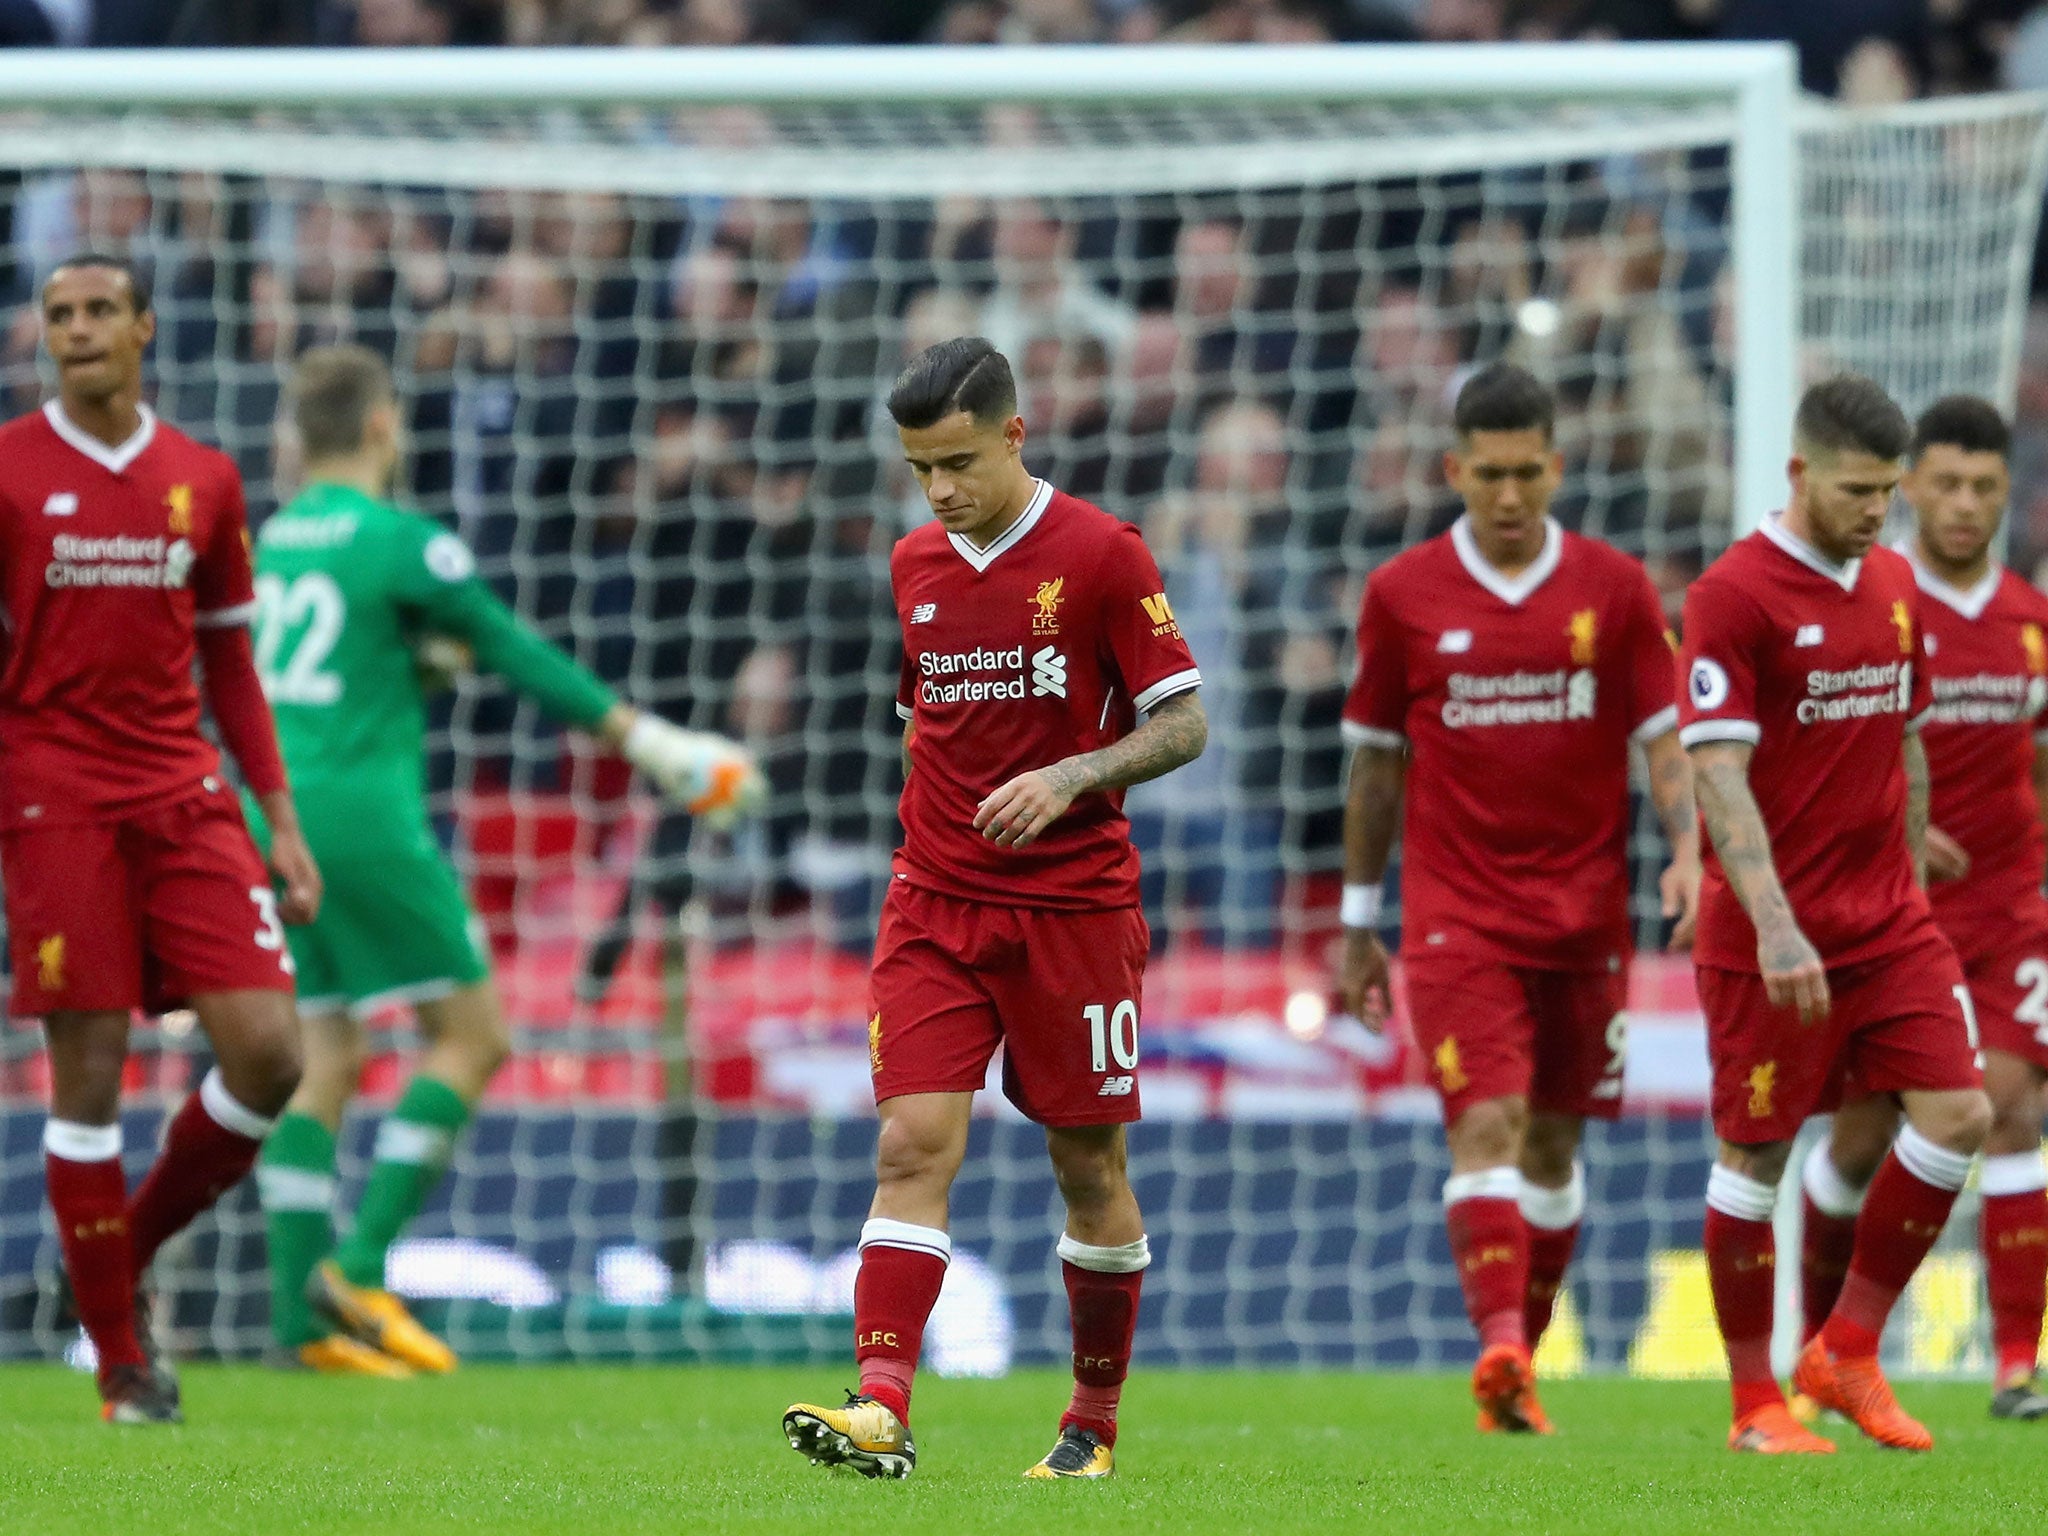 Philippe Coutinho said his side conceded 'silly goals' against Tottenham